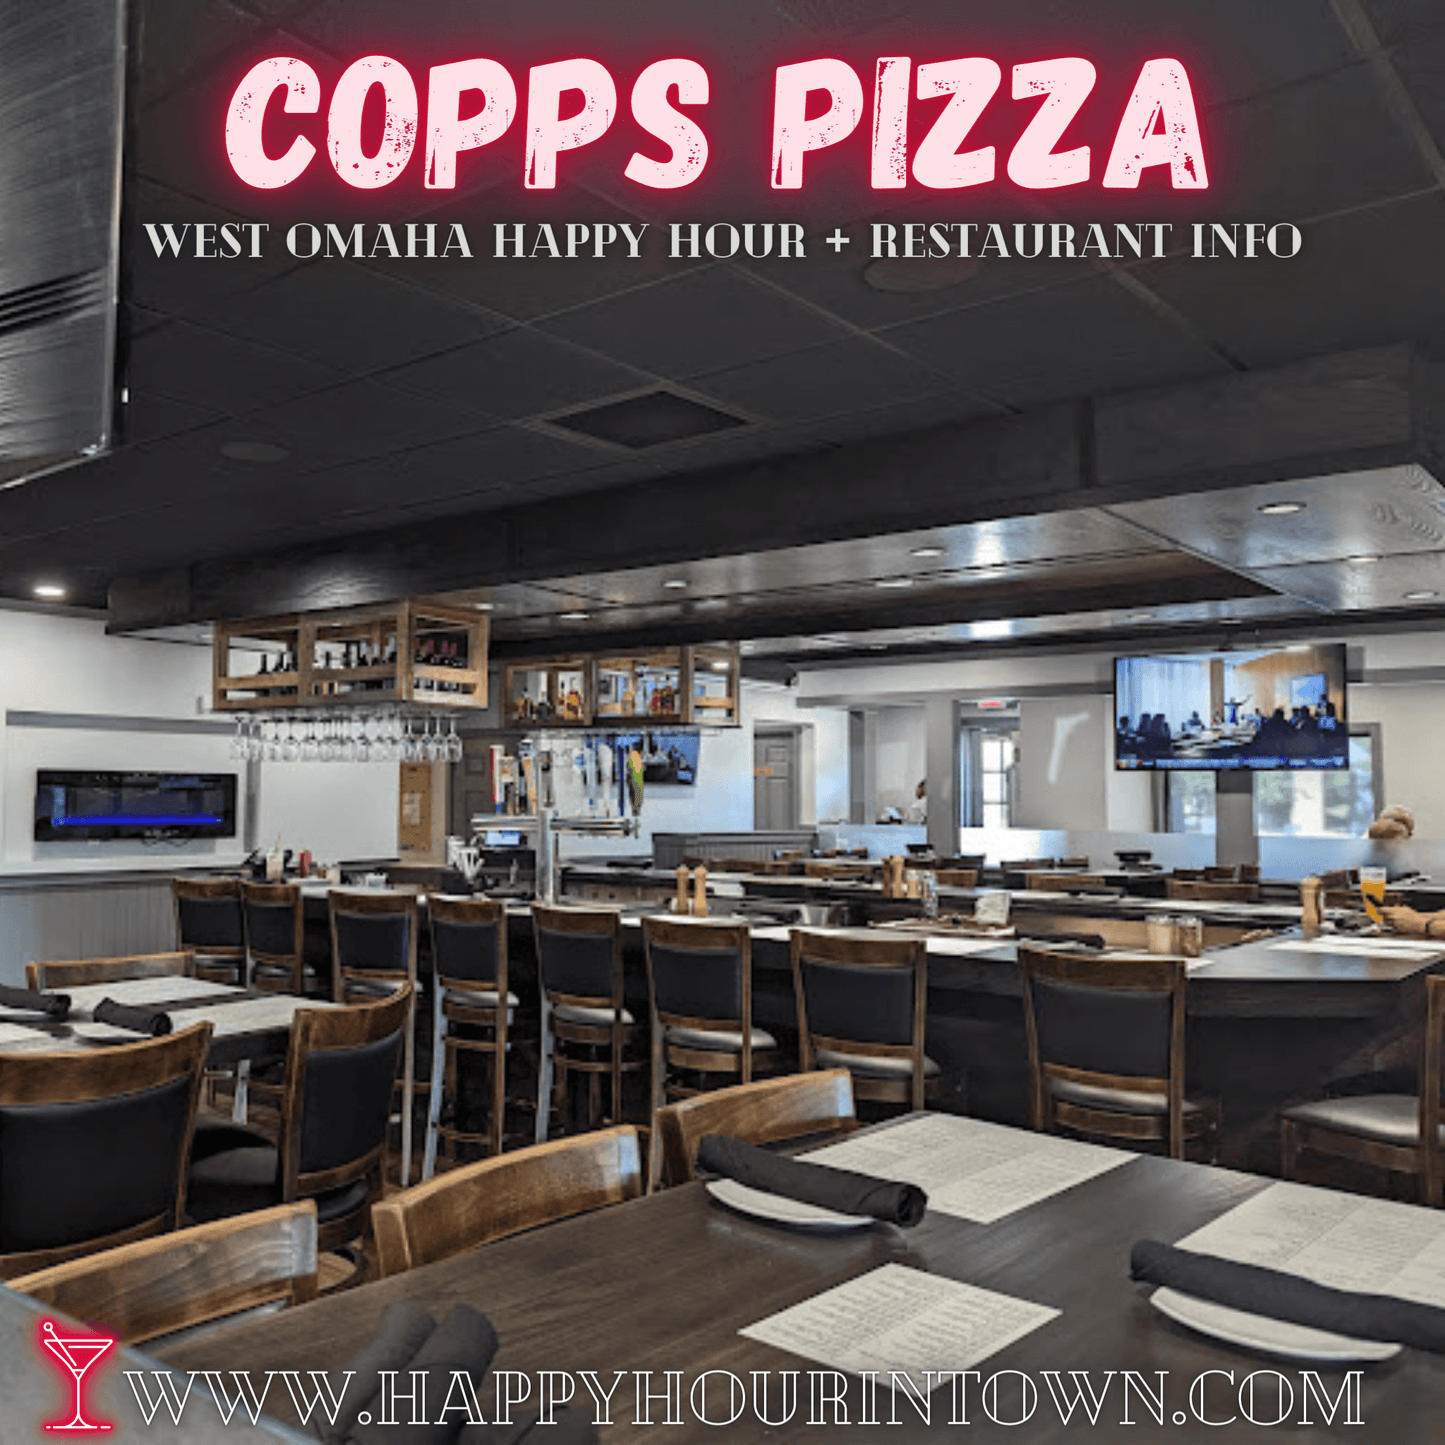 Copps Pizza West Omaha Happy Hour In Town